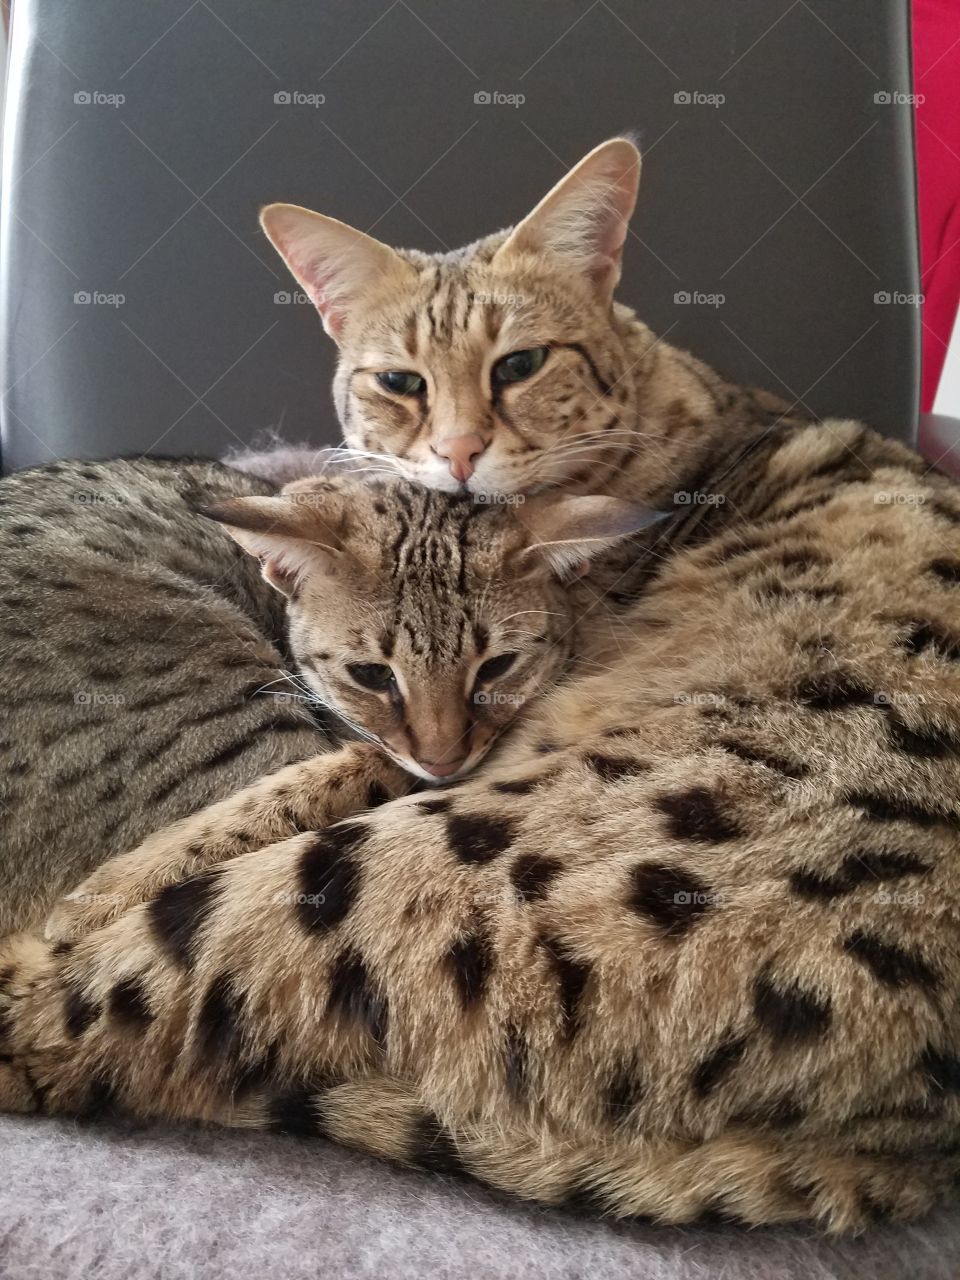 Snuggling Cats